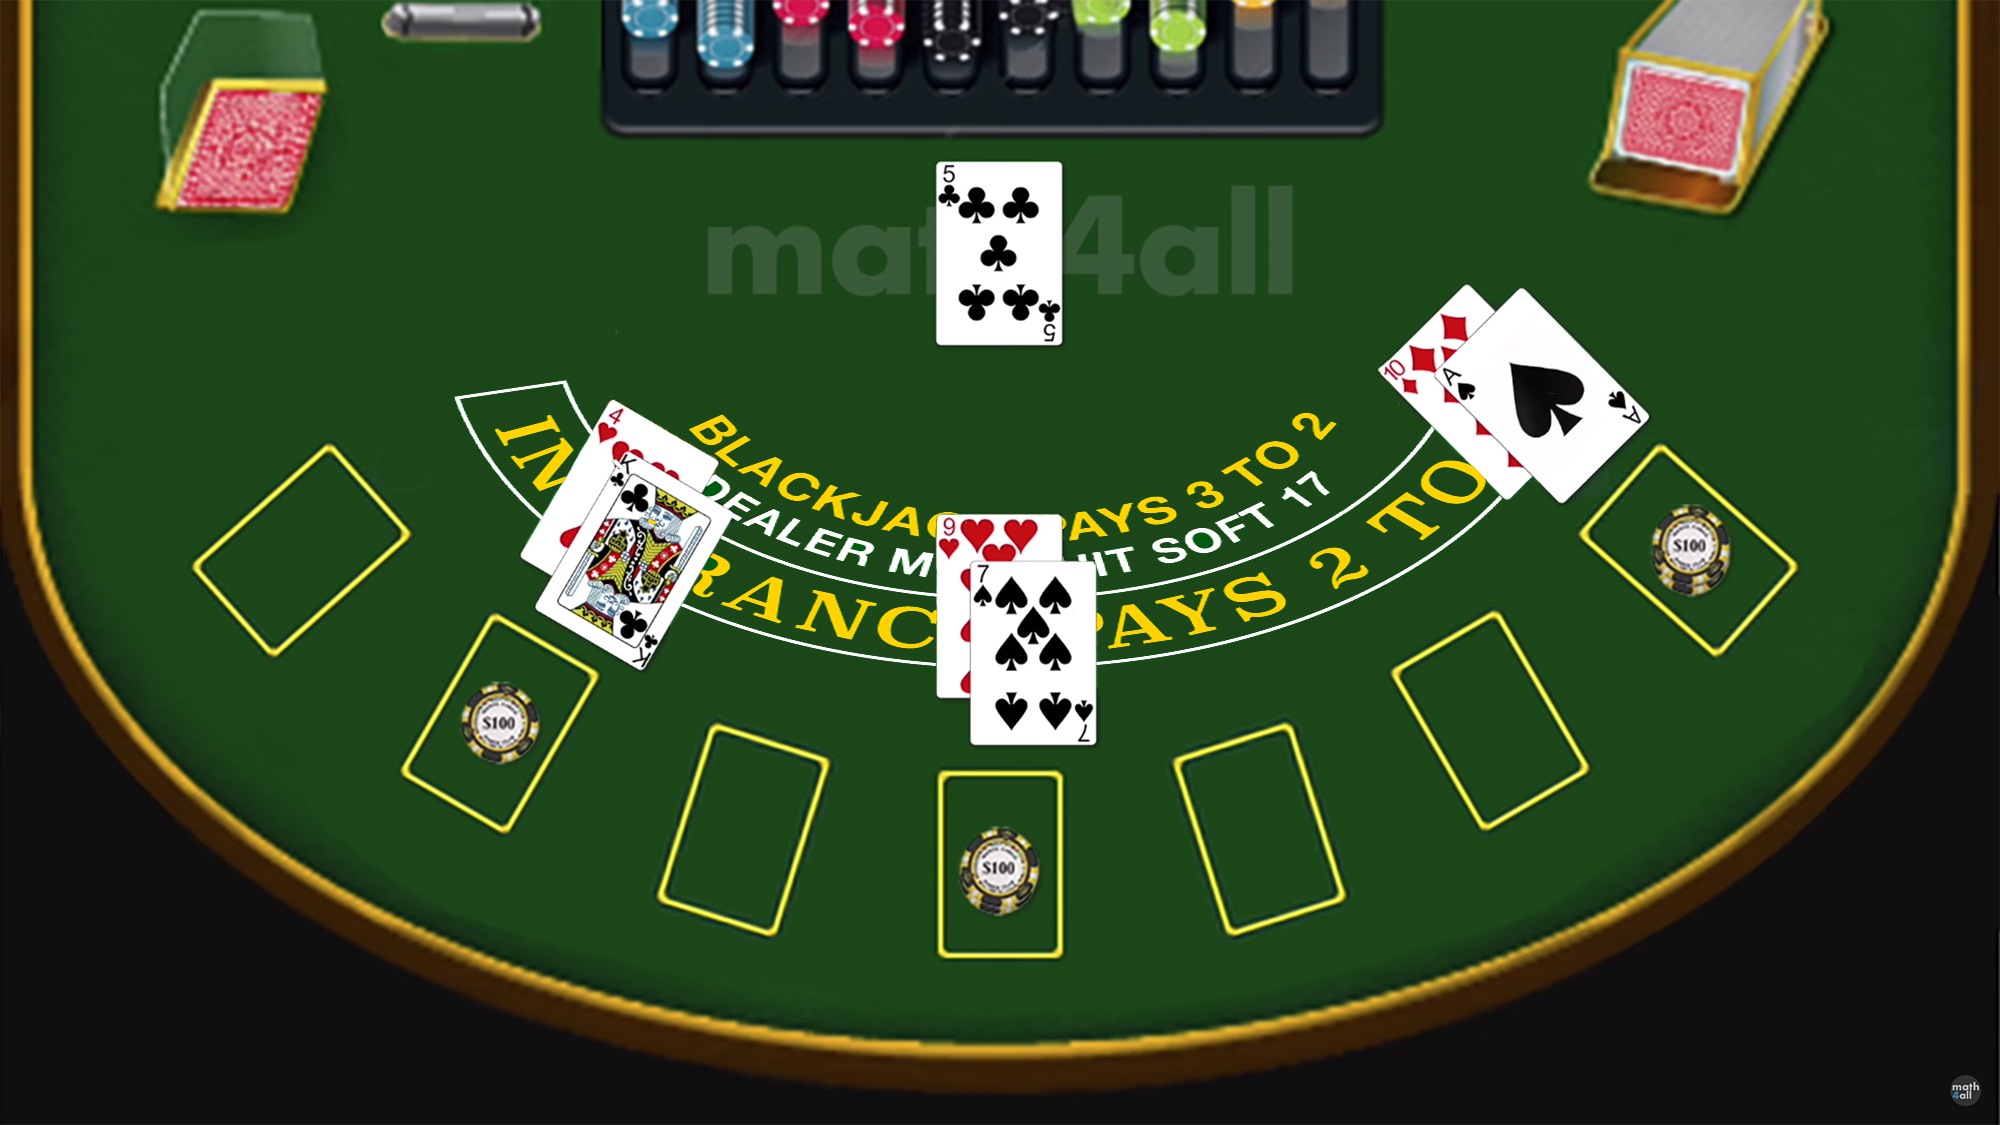 Is there a maximum number of players at a Blackjack table?